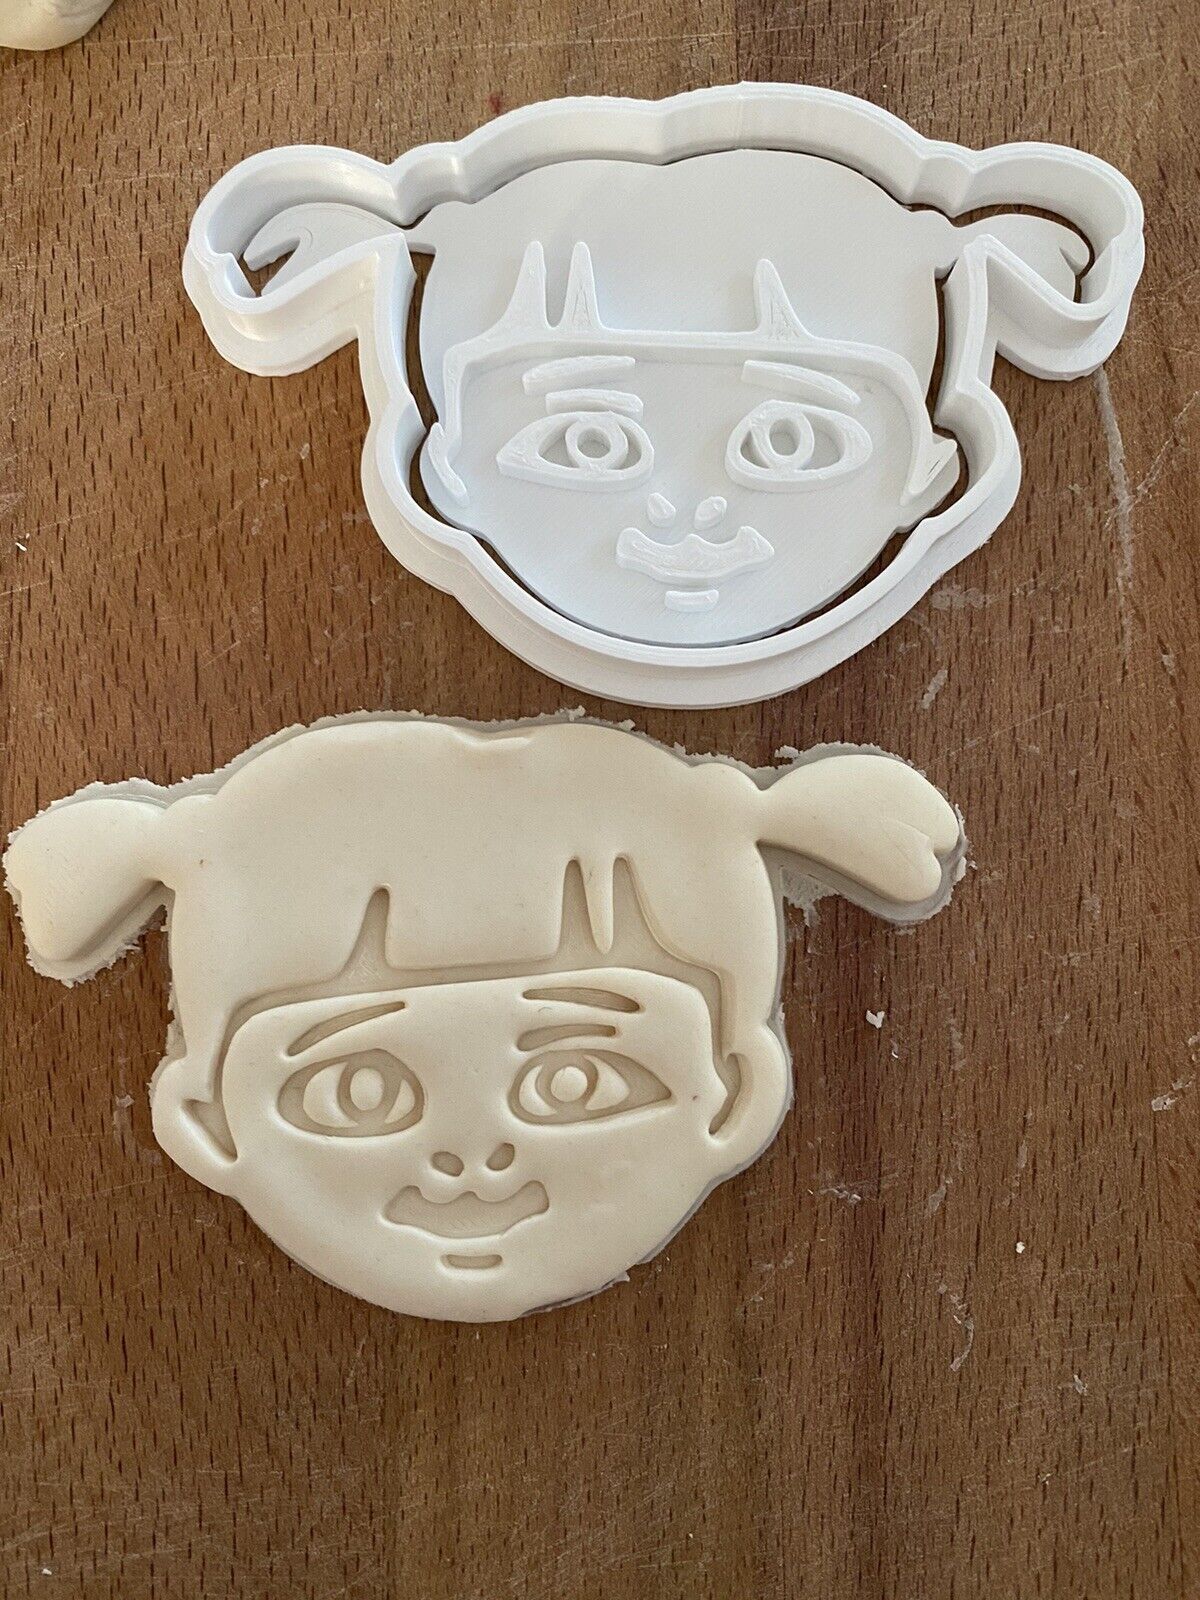 Long-awaited Monsters Inc Boo Deluxe Cookie Cutter